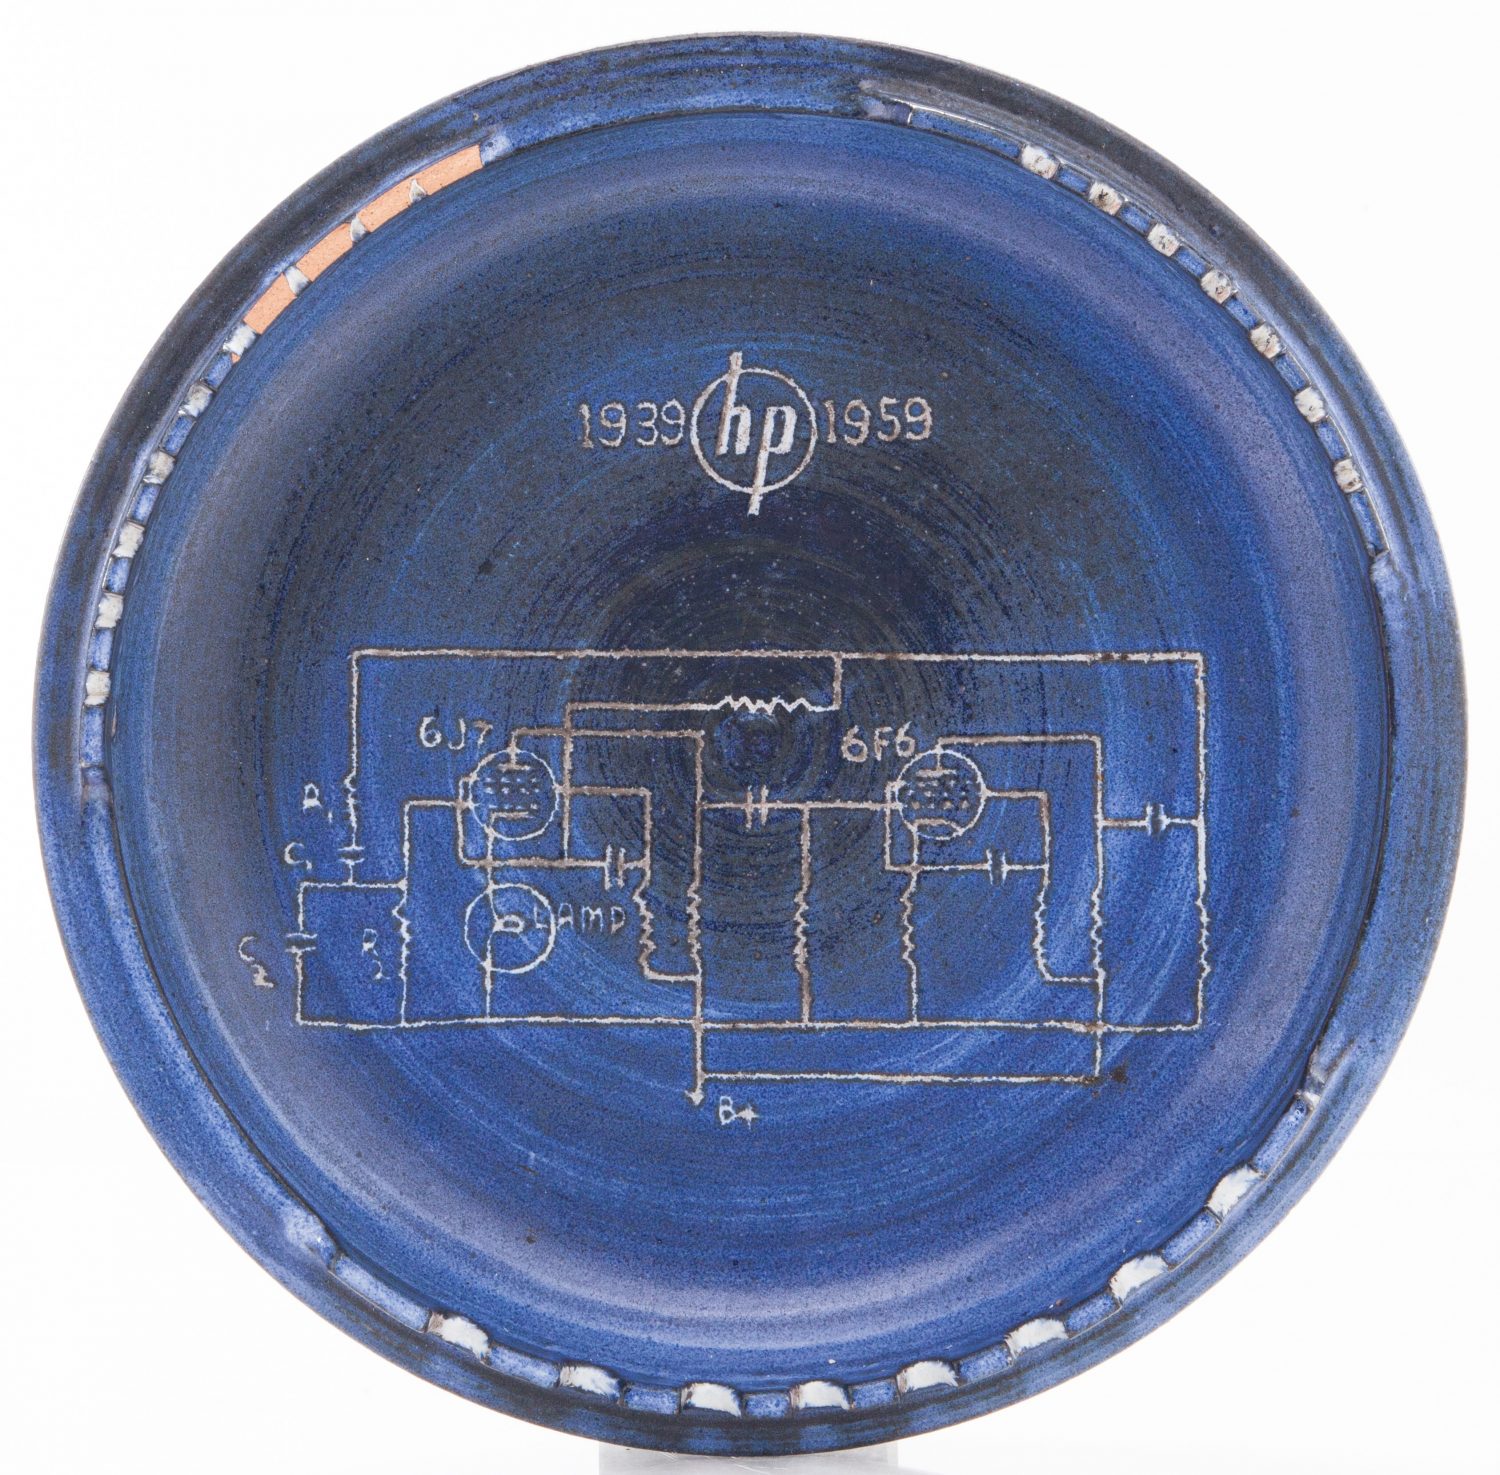 Top-down view of a blue ashtray with the 200A schematic etched in its center. 